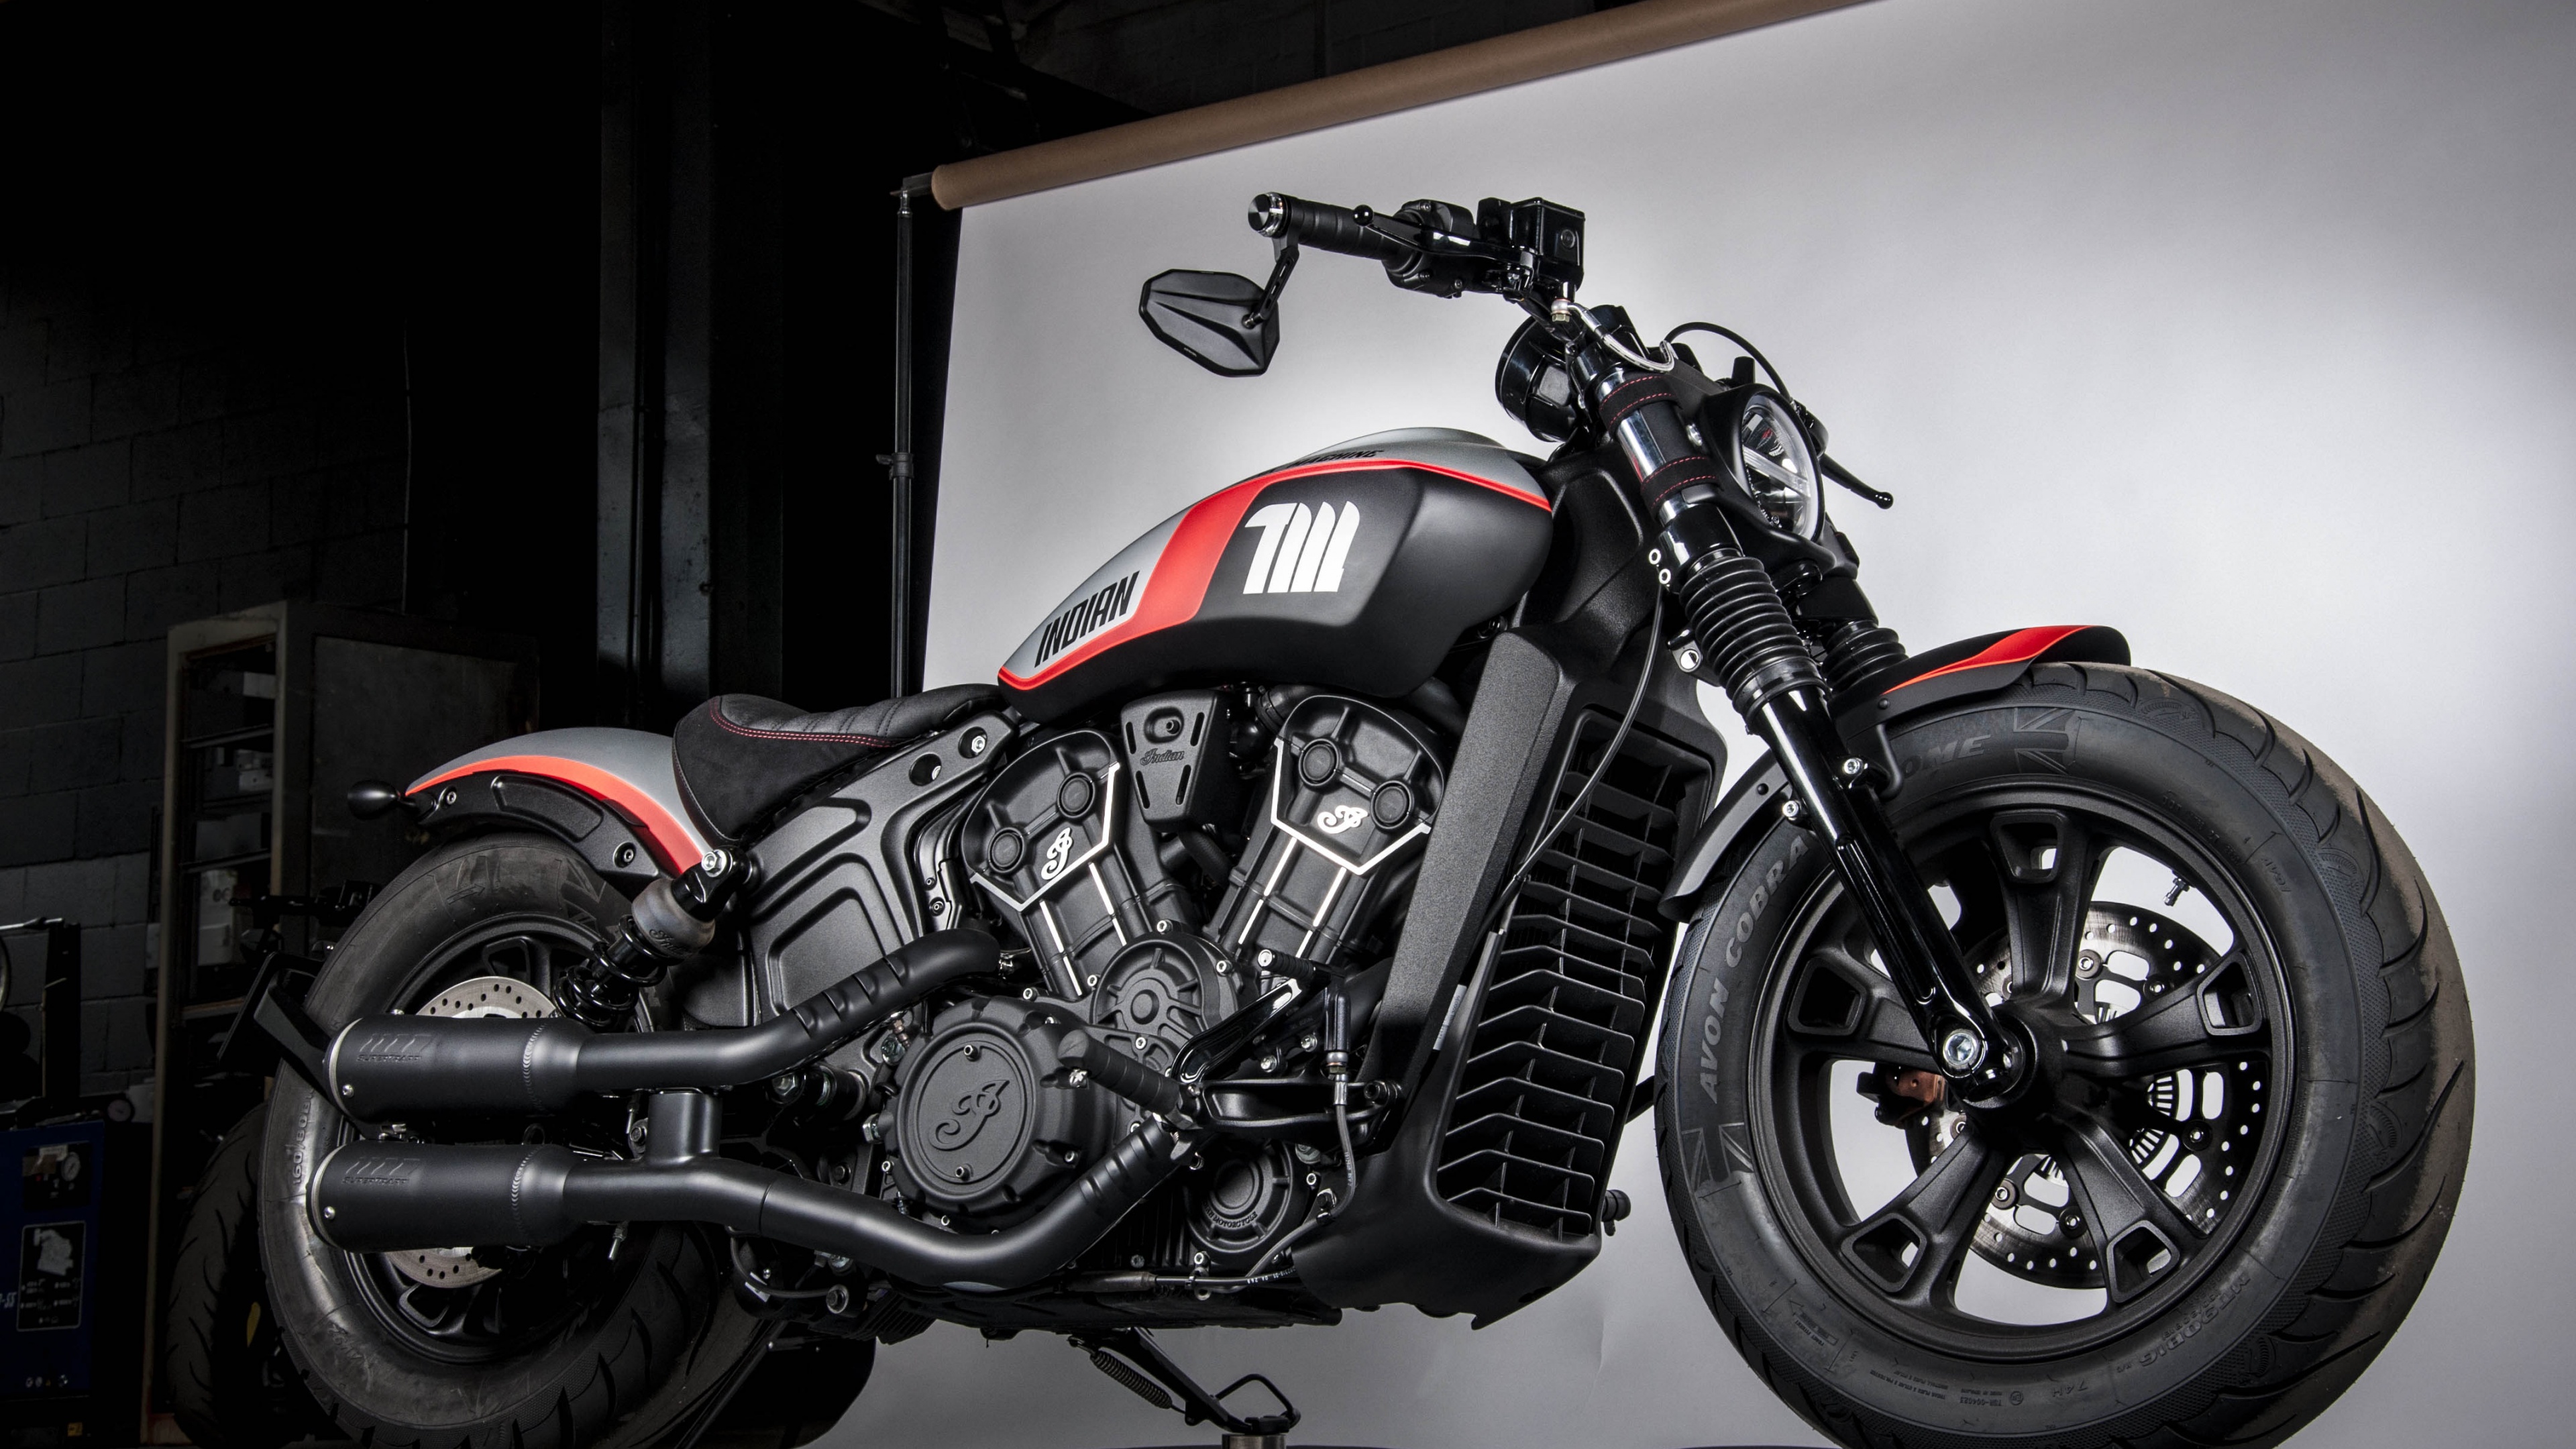 Indian Chief with tattoos - Motorcycles.News - Motorcycle-Magazine